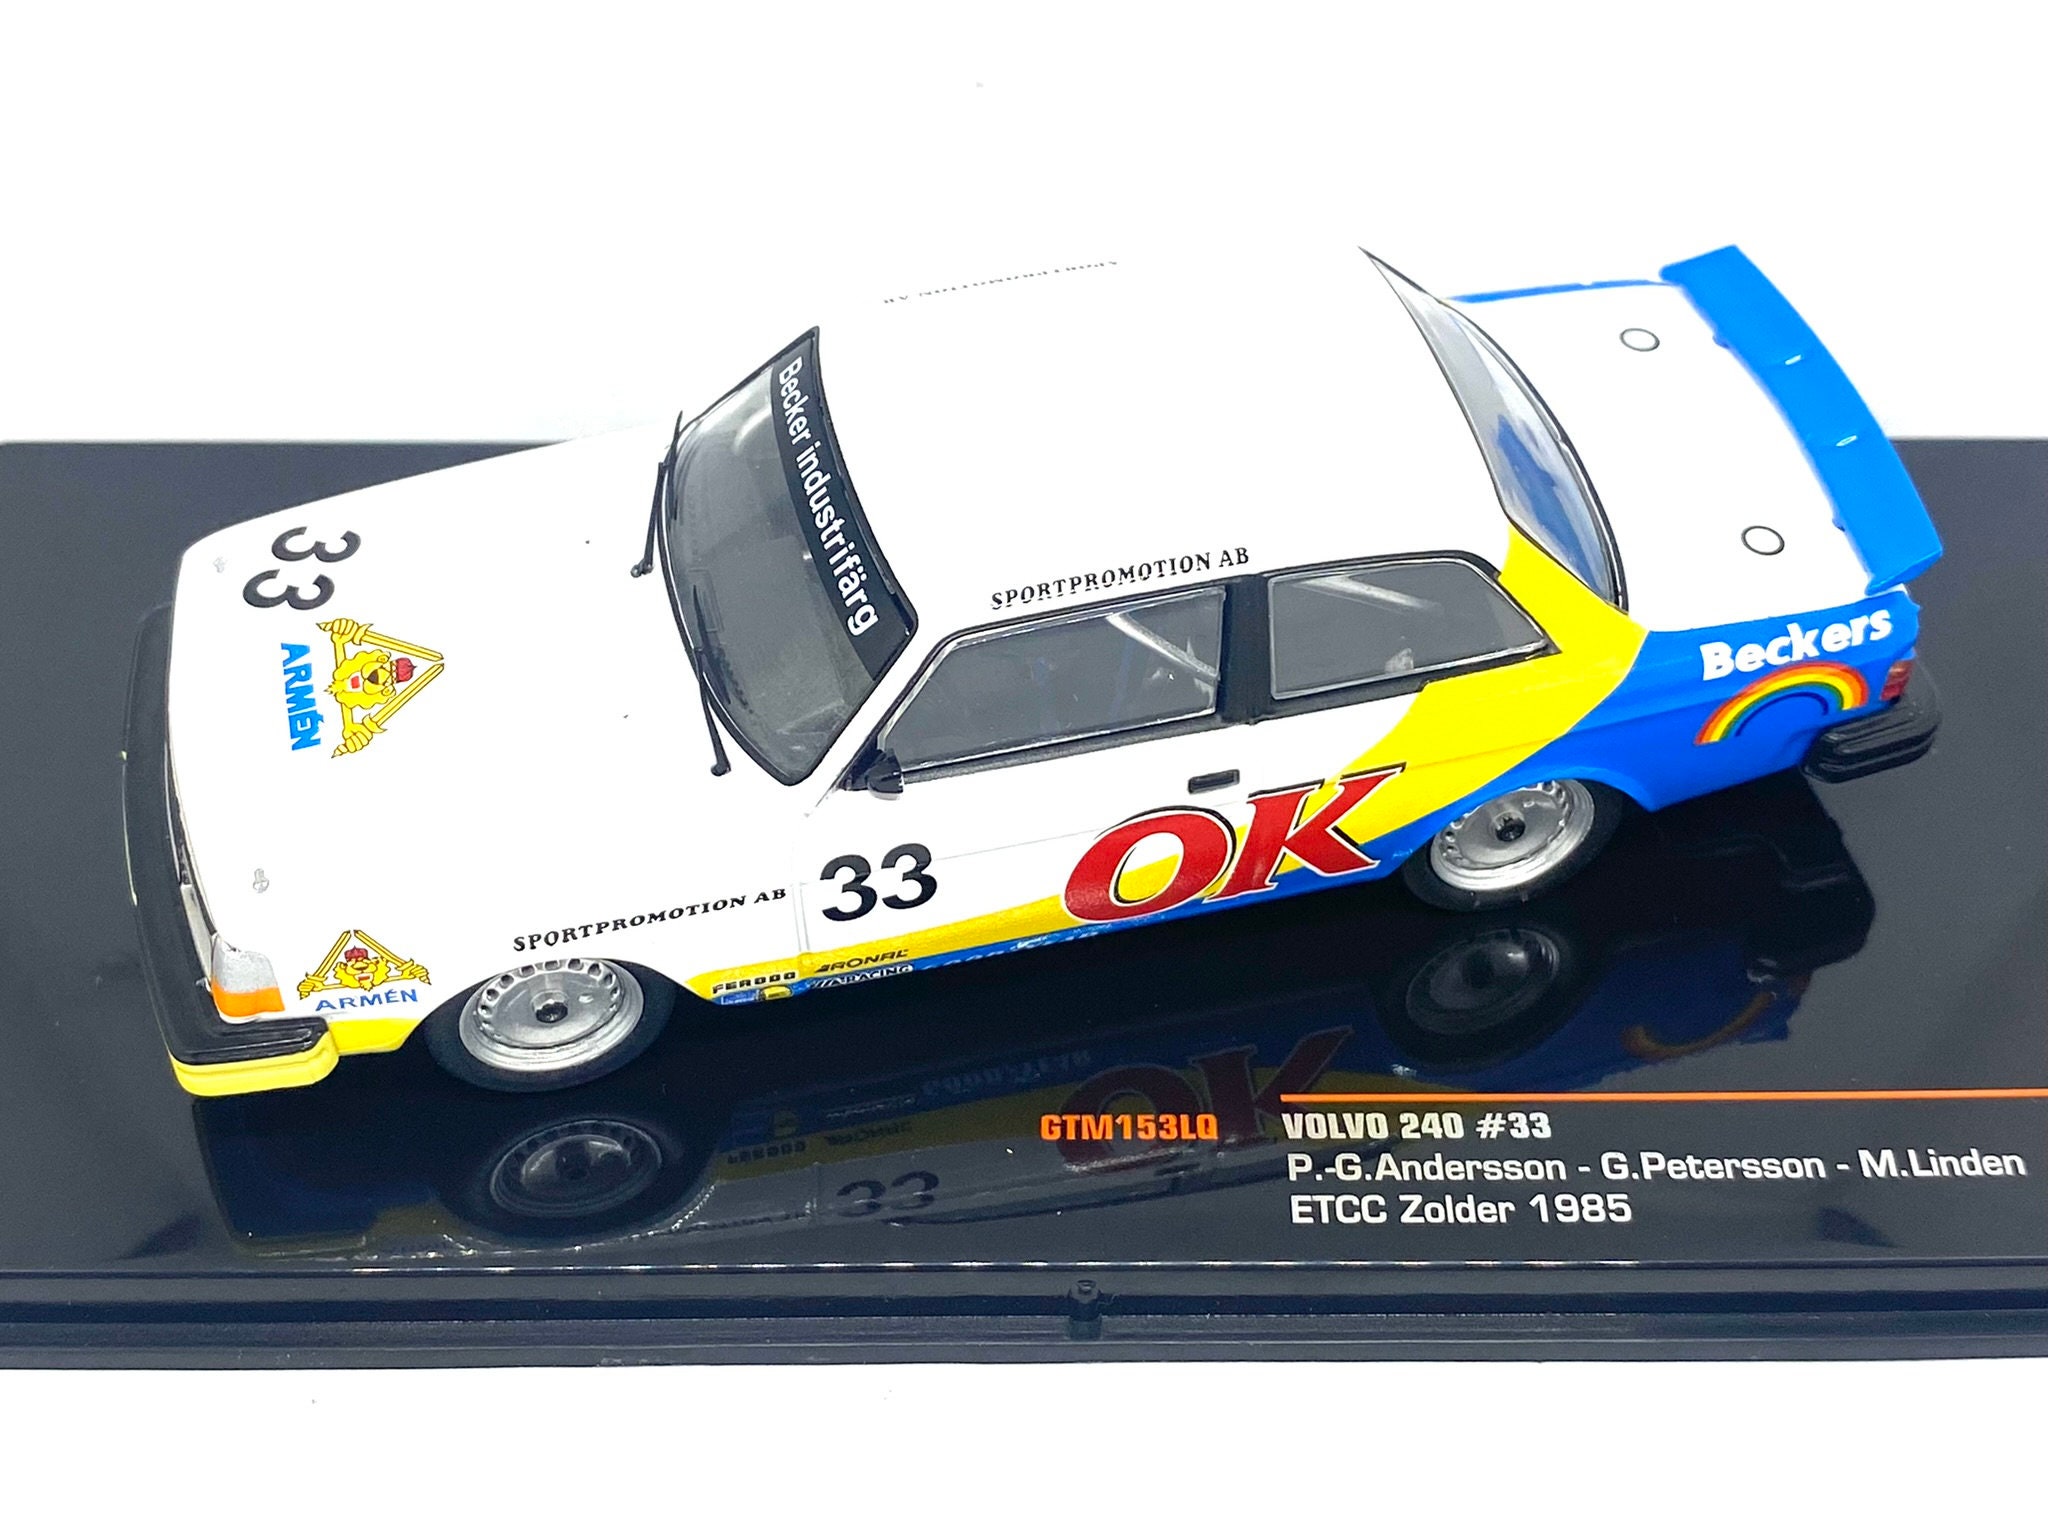 1:43 Scale IXO Models Volvo 240 ETCC Touring Car P G Andersson